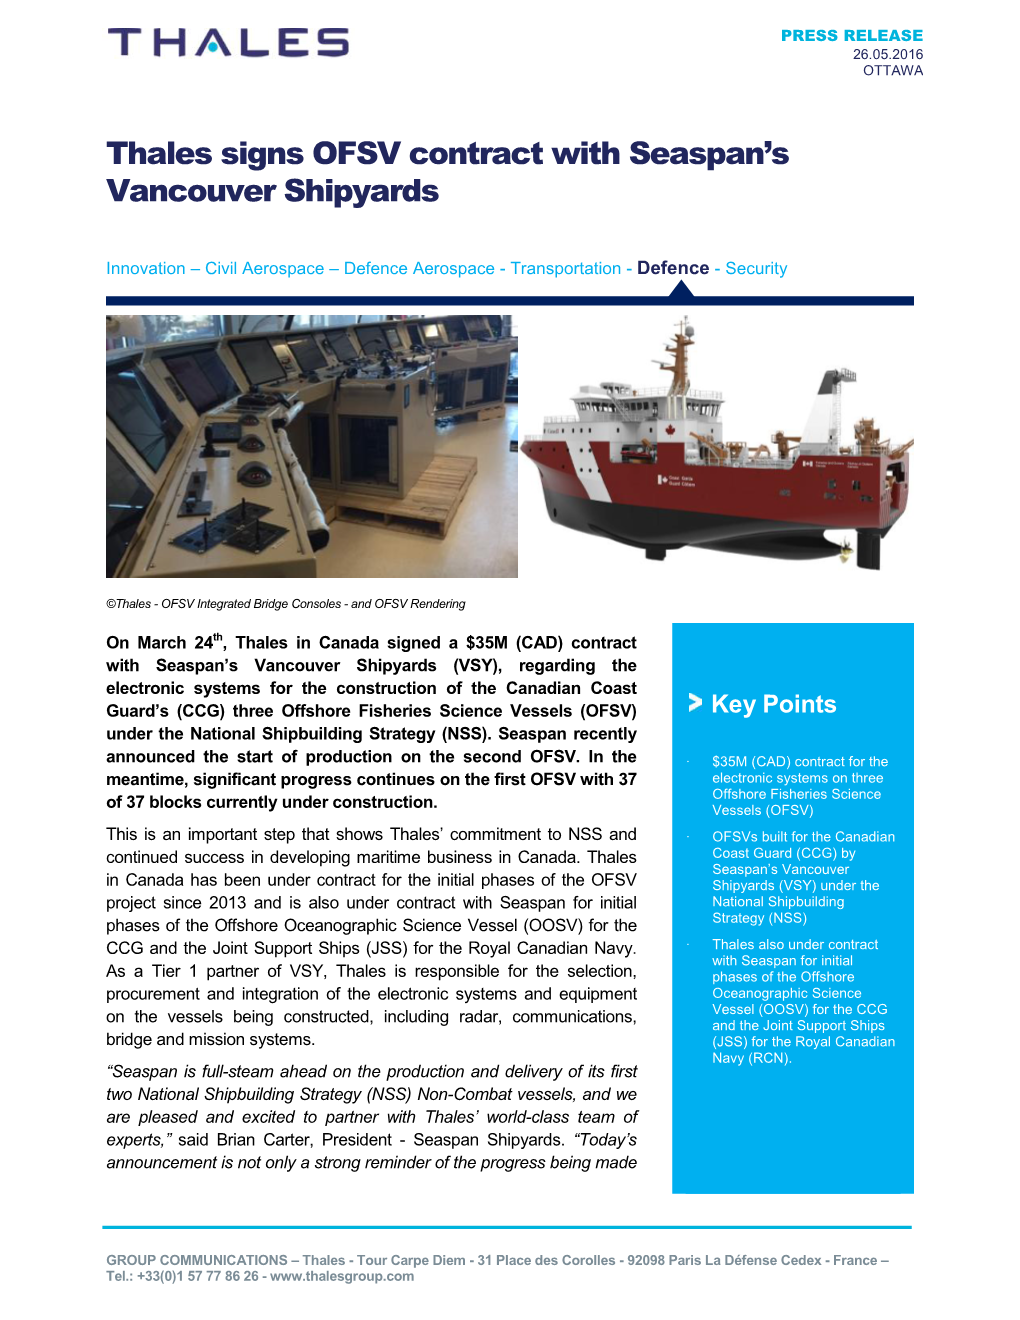 Thales Signs OFSV Contract with Seaspan's Vancouver Shipyards